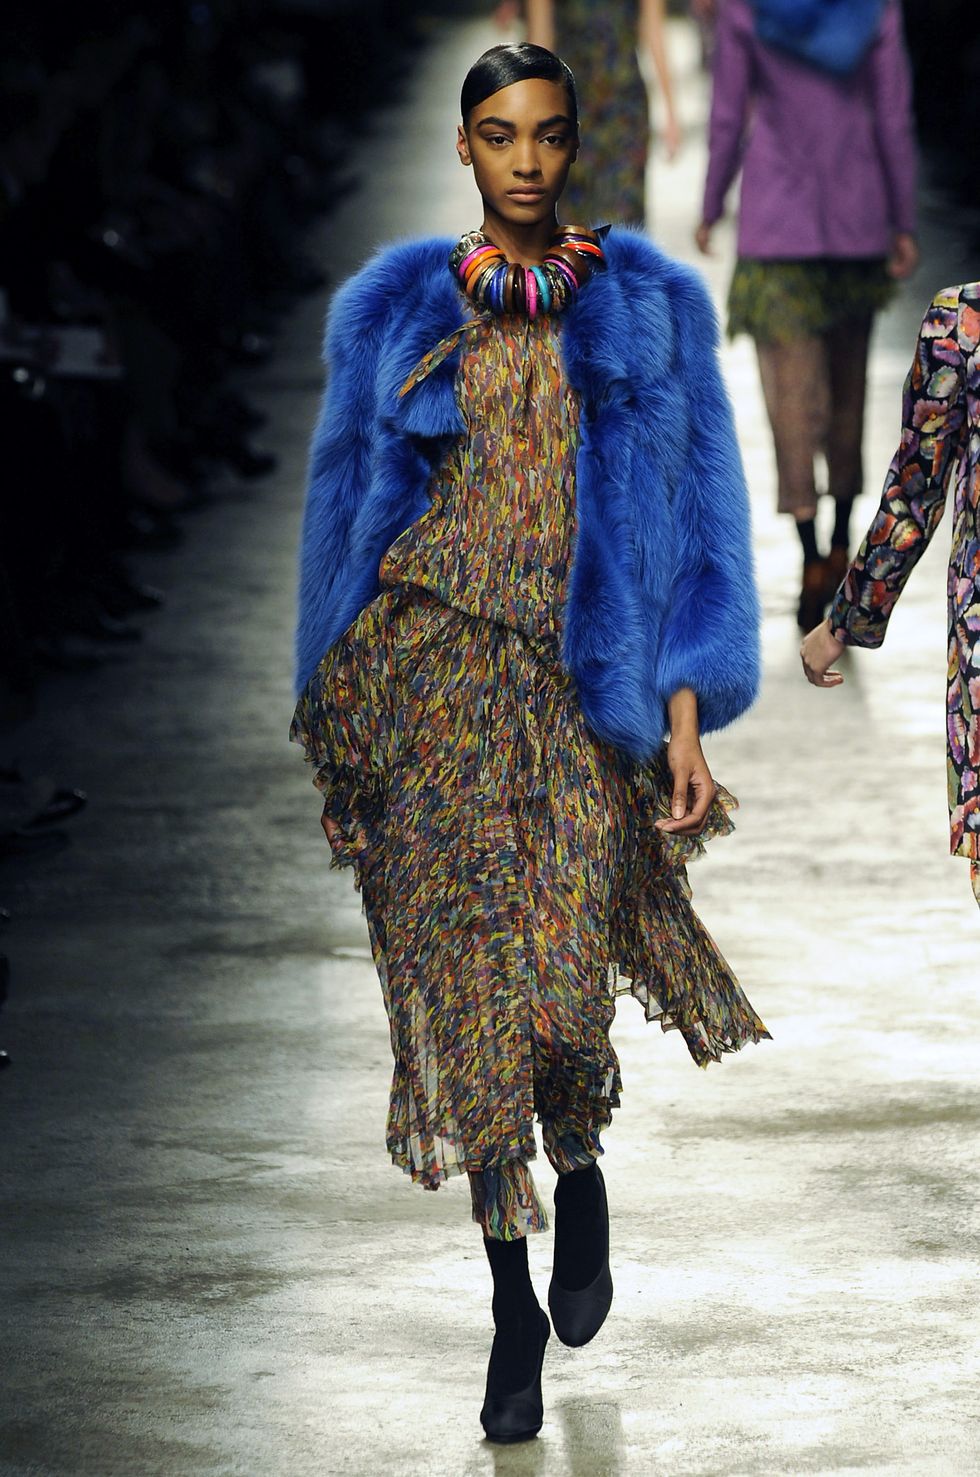 paris, france february 26 uk out a model walks the runway wearing the dries van noten fallwinter 20082009 collection during paris fashion week on the 26th of february 2008 in paris,france photo by chris moorecatwalkinggetty images